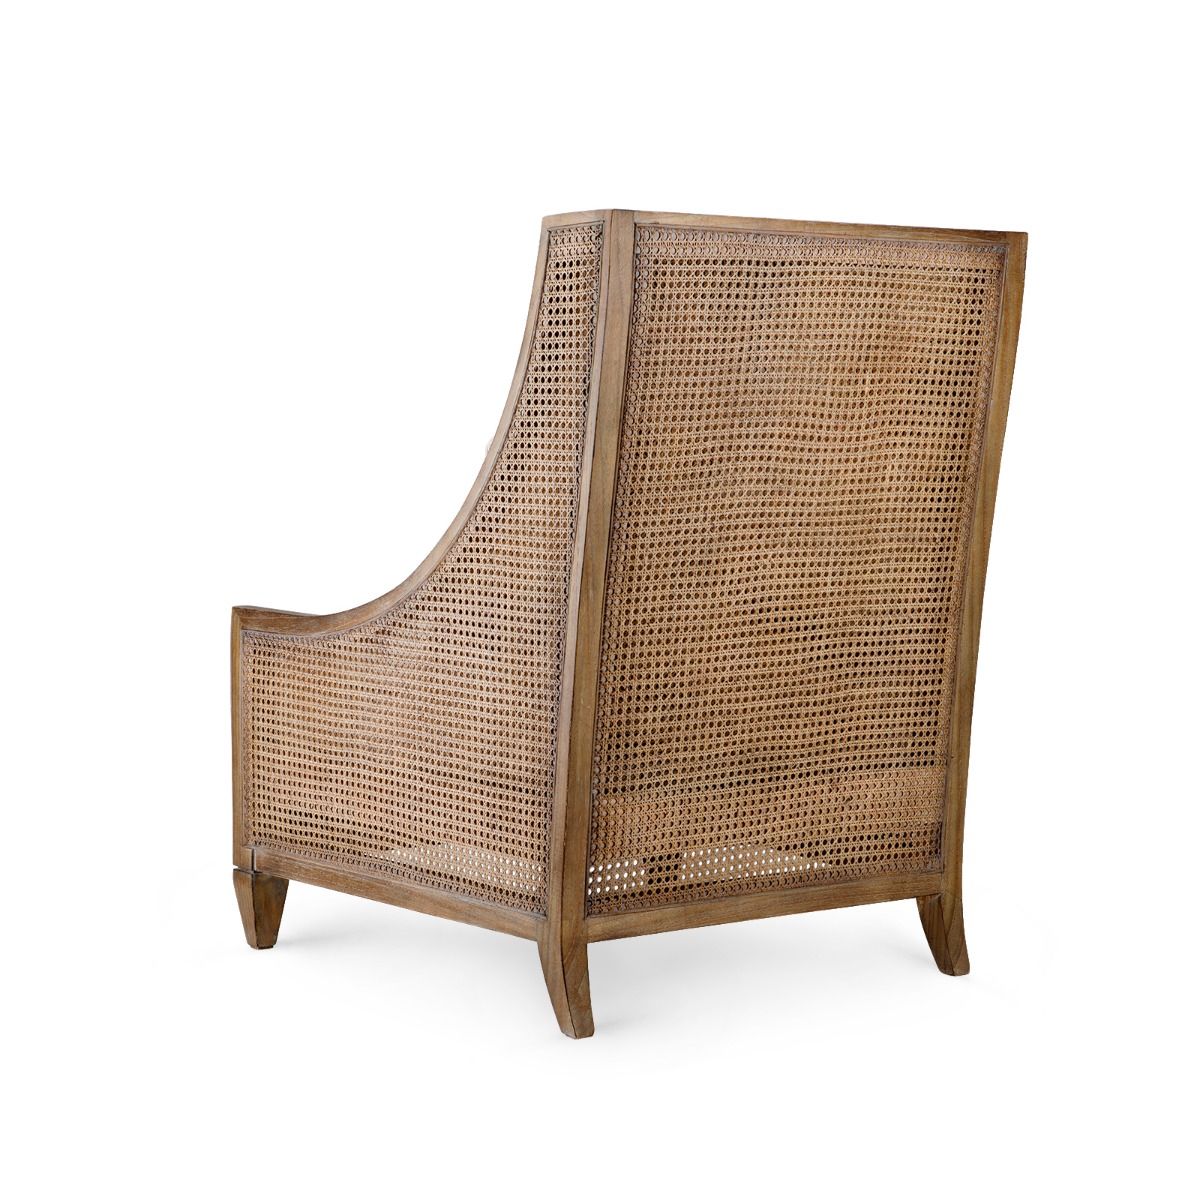 Load image into Gallery viewer, Raleigh Club Chair Lounge Chair Bungalow 5     Four Hands, Burke Decor, Mid Century Modern Furniture, Old Bones Furniture Company, Old Bones Co, Modern Mid Century, Designer Furniture, https://www.oldbonesco.com/
